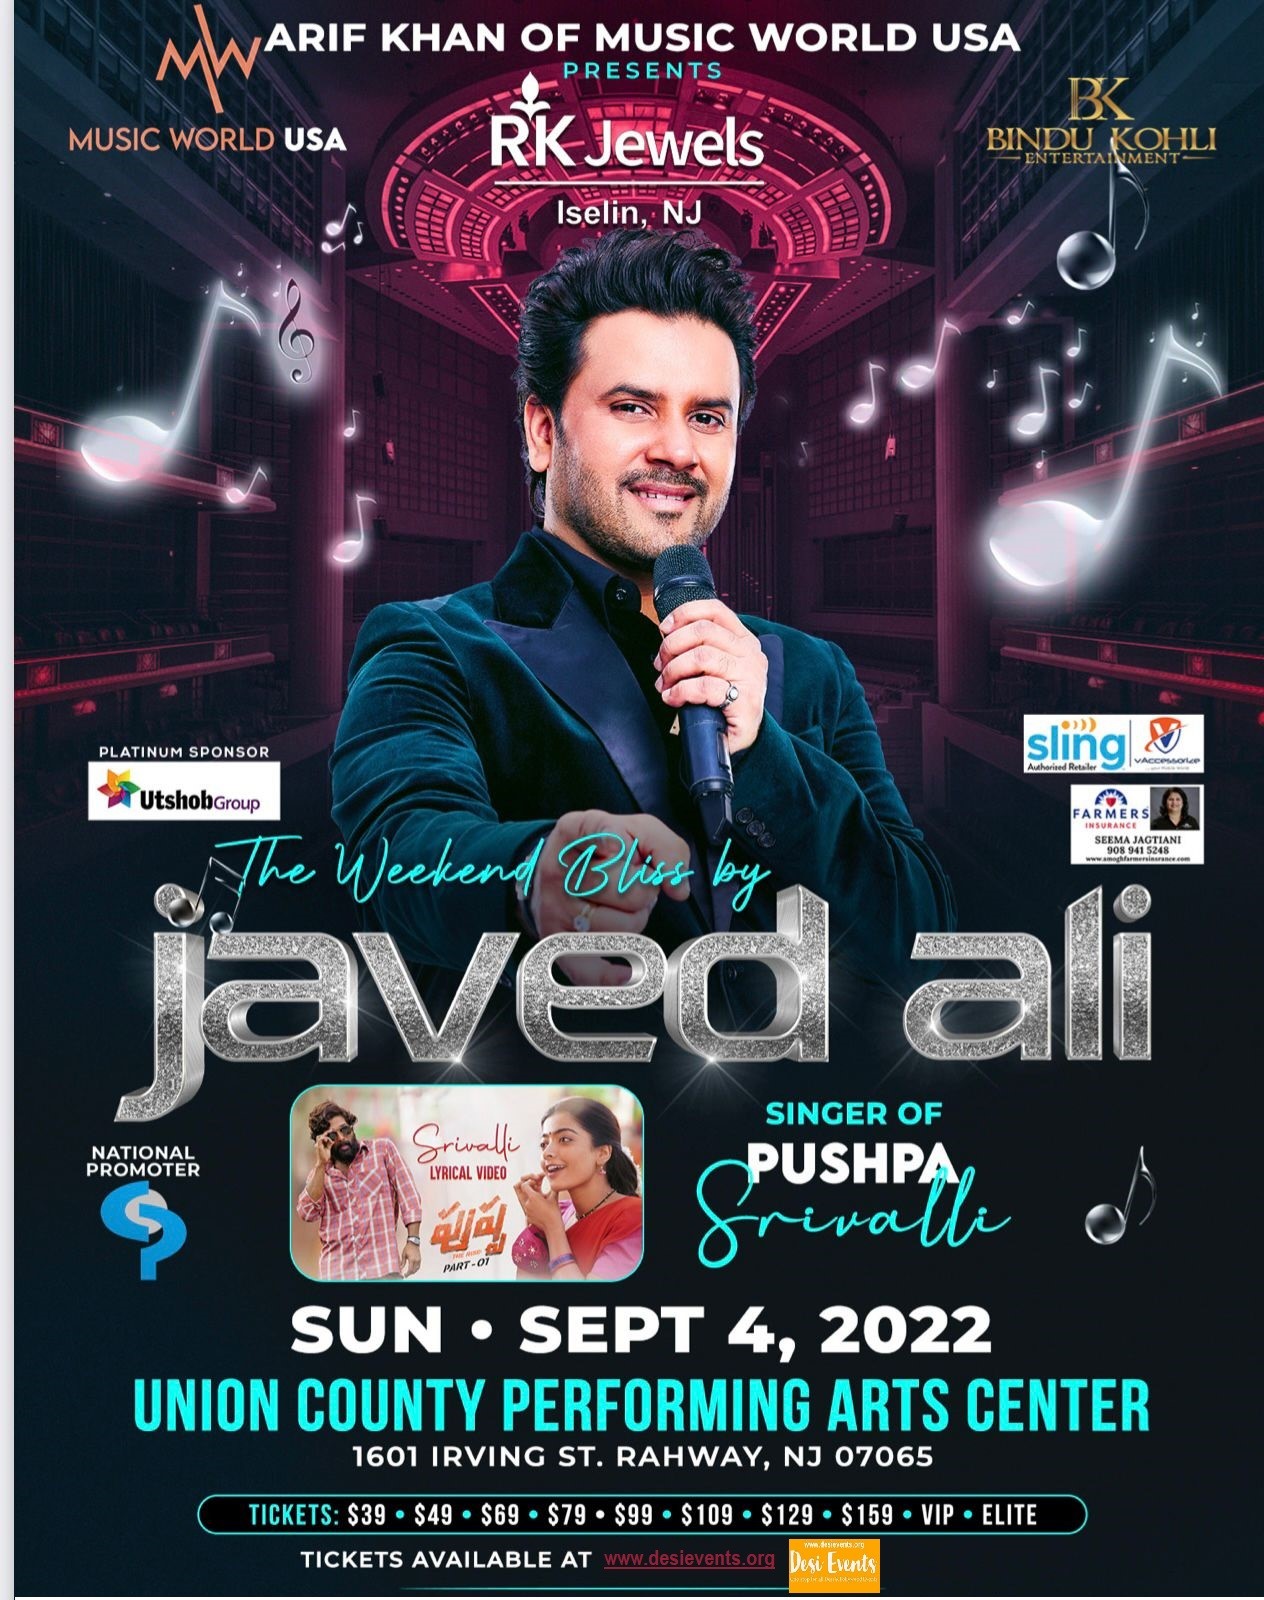 Javed Ali Live Concert Union County Center NJ 2022 August, 5, 2022 AT UNION COUNTY PERFORMING ART CENTER 1601 IRVING ST. RA on Aug 05, 19:00@Union county center - Buy tickets and Get information on Desi Events desievents.org